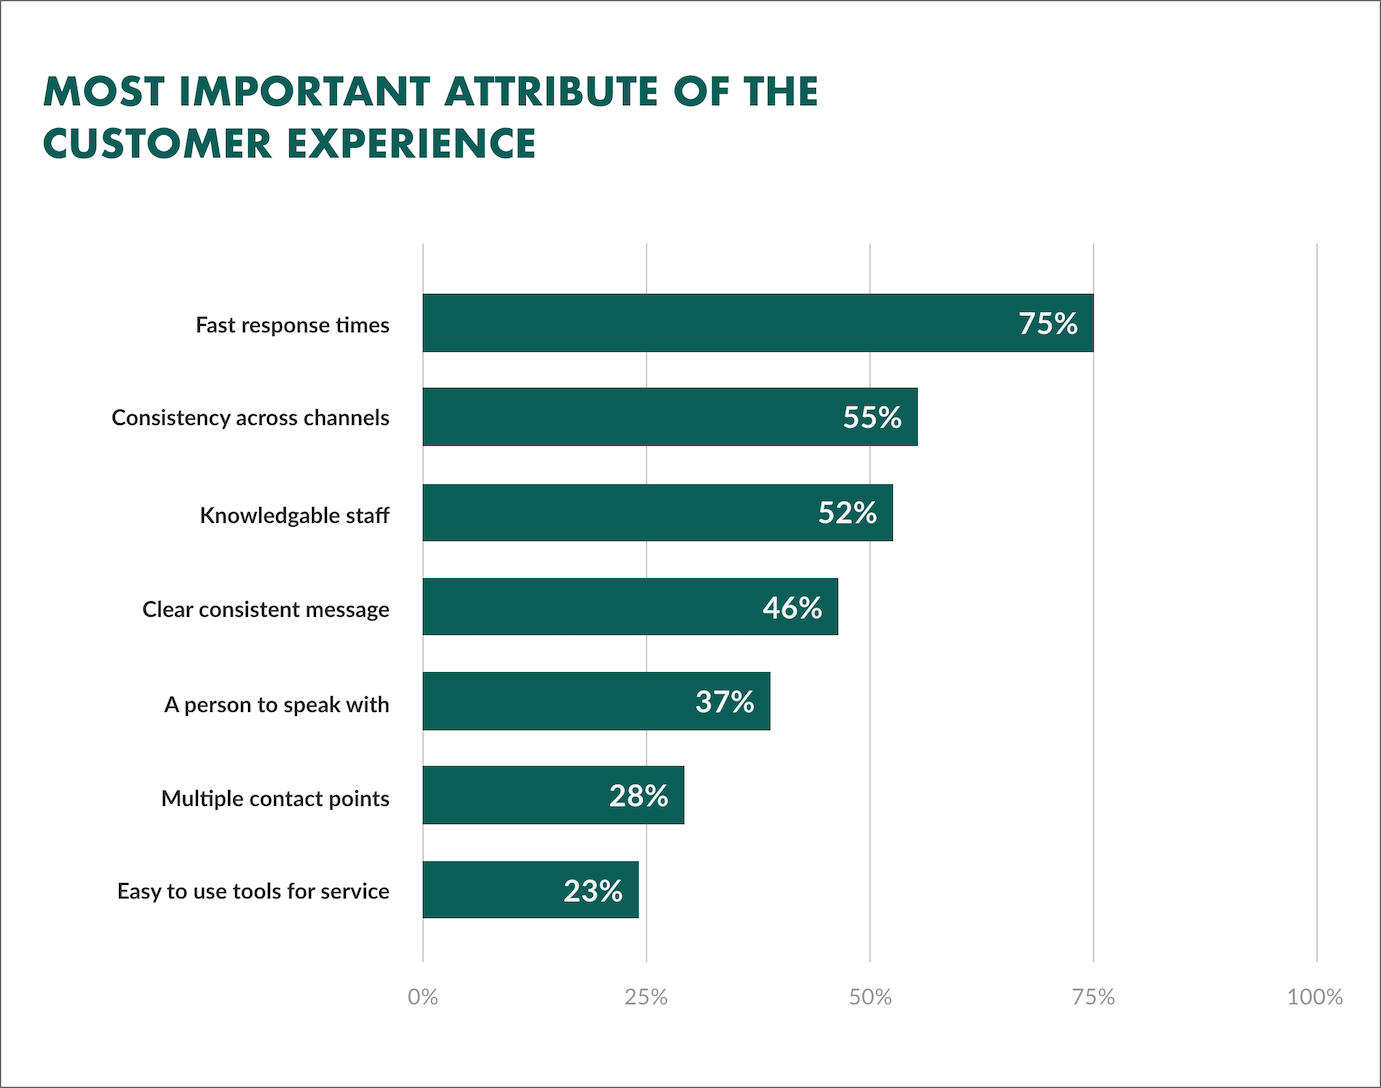 Most important attributes in Customer Experience